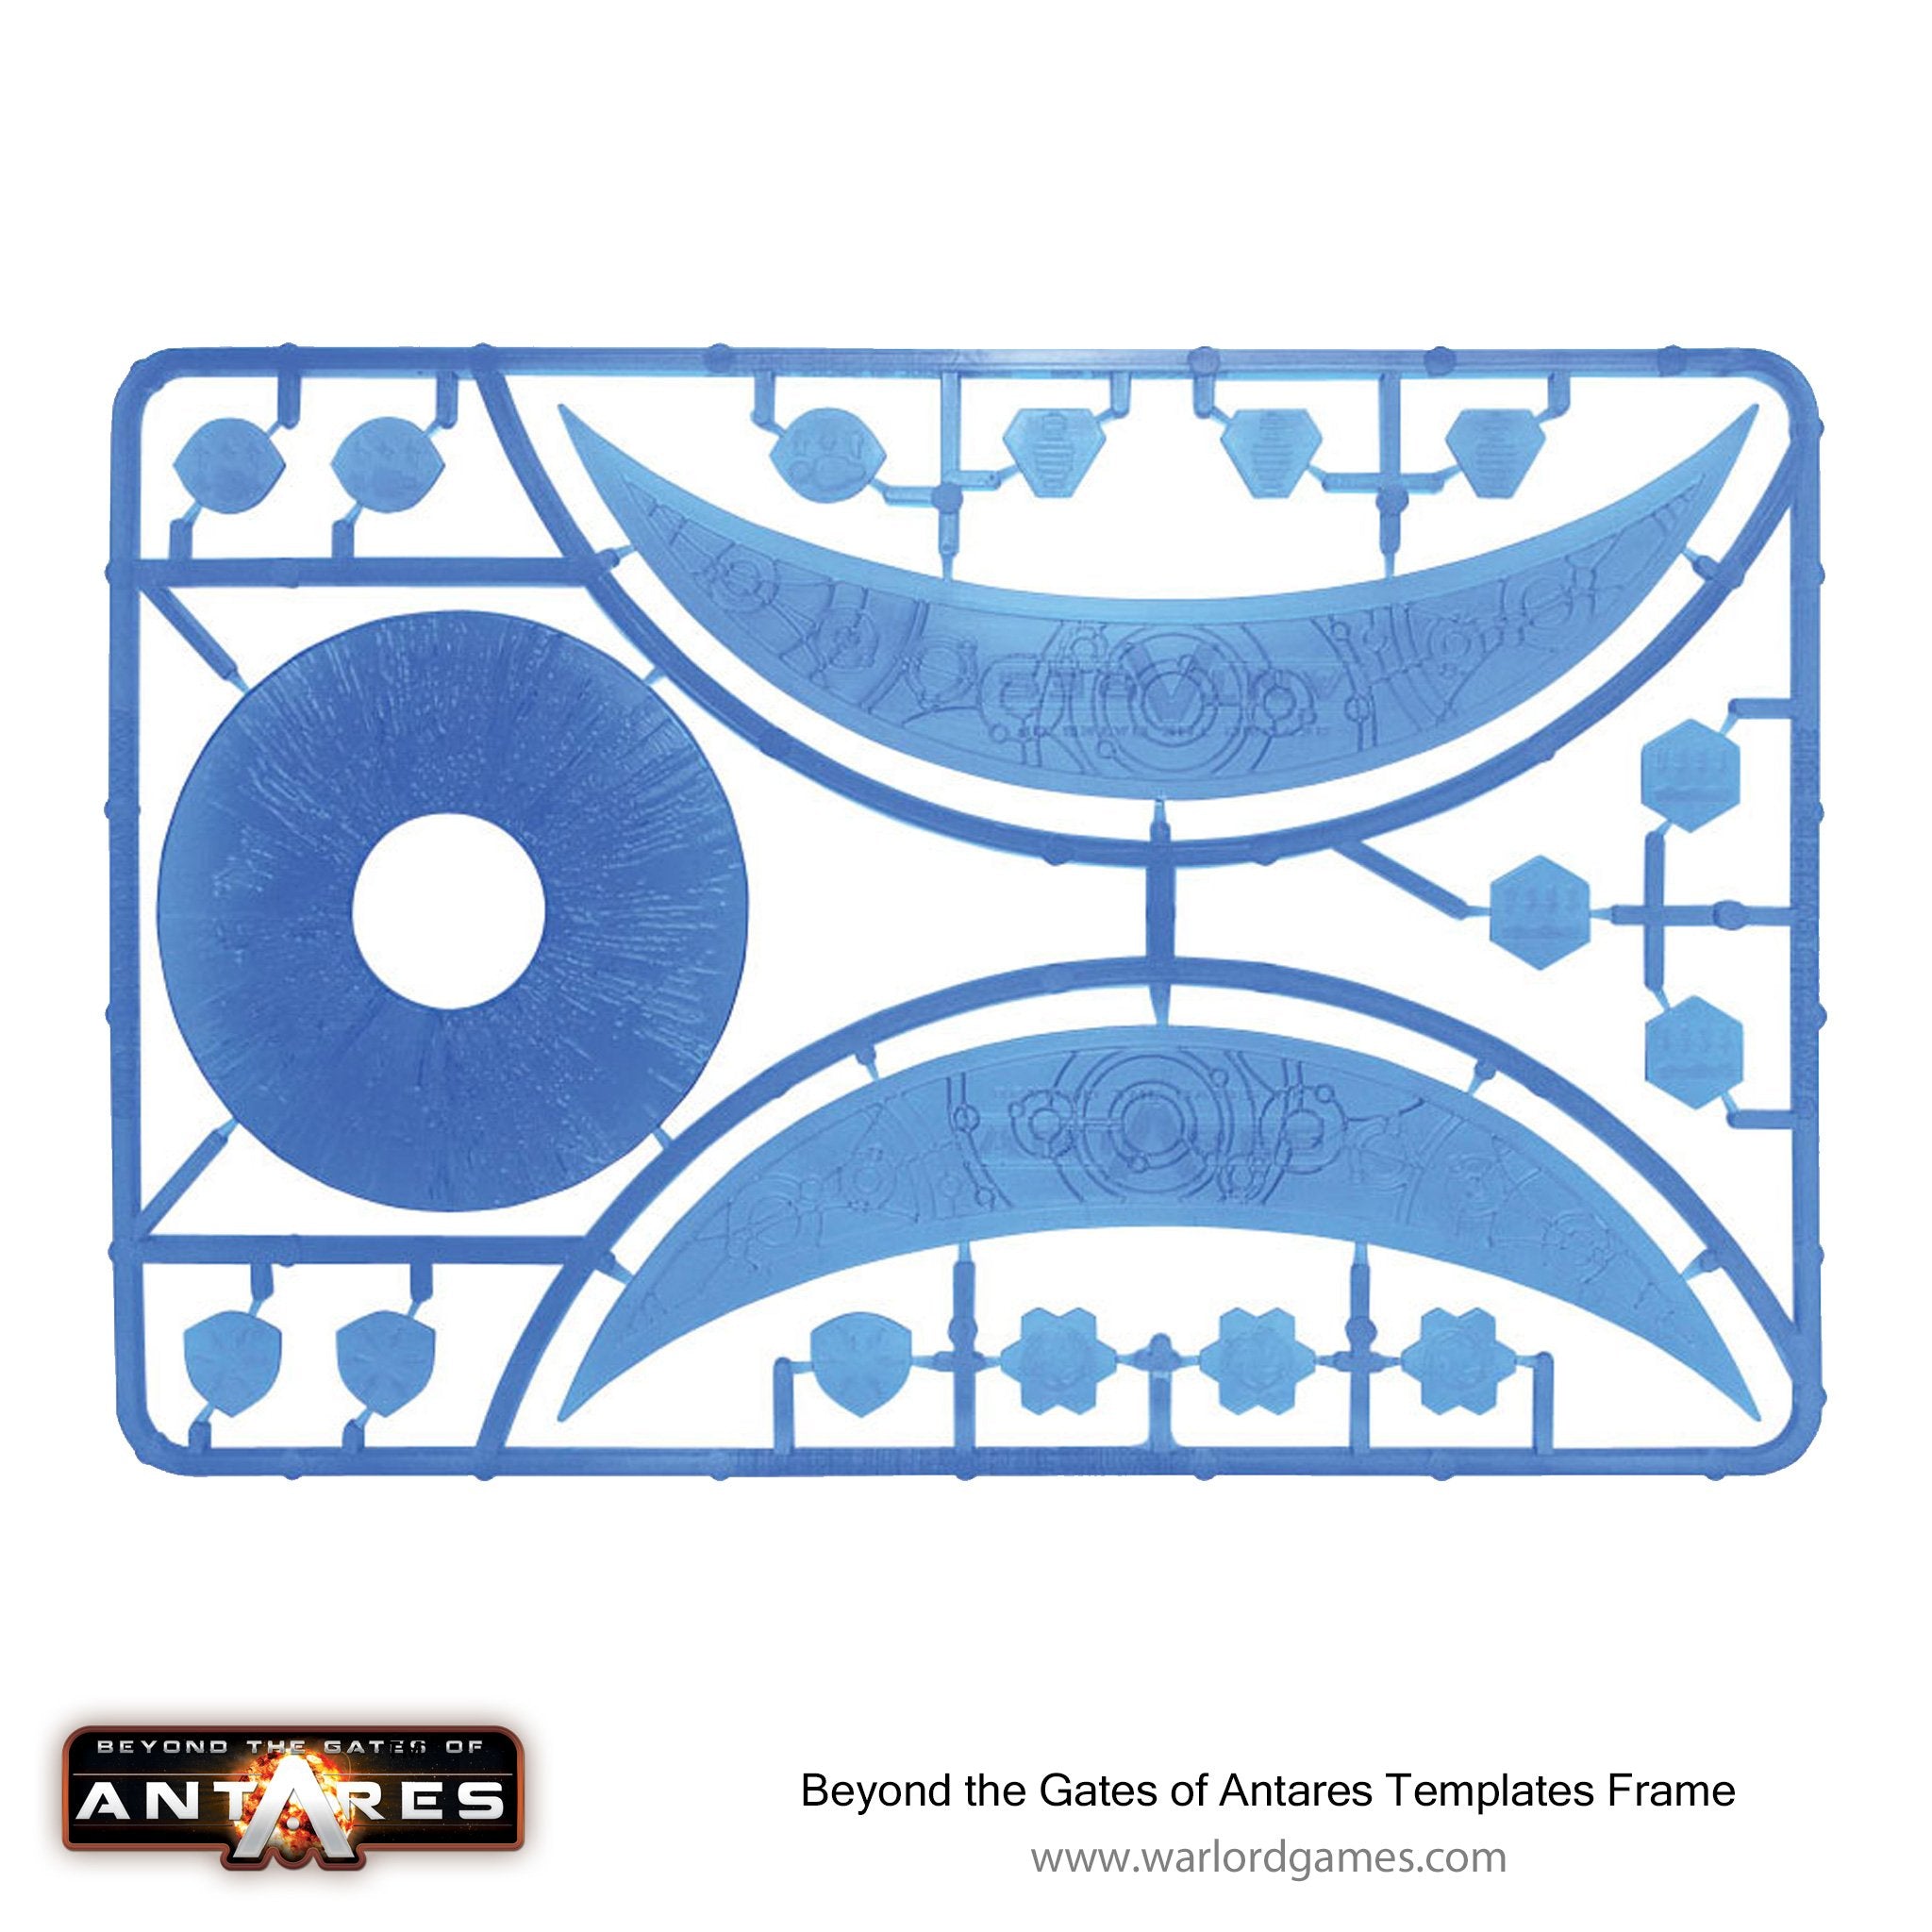 Beyond the Gates of Antares Templates Frame